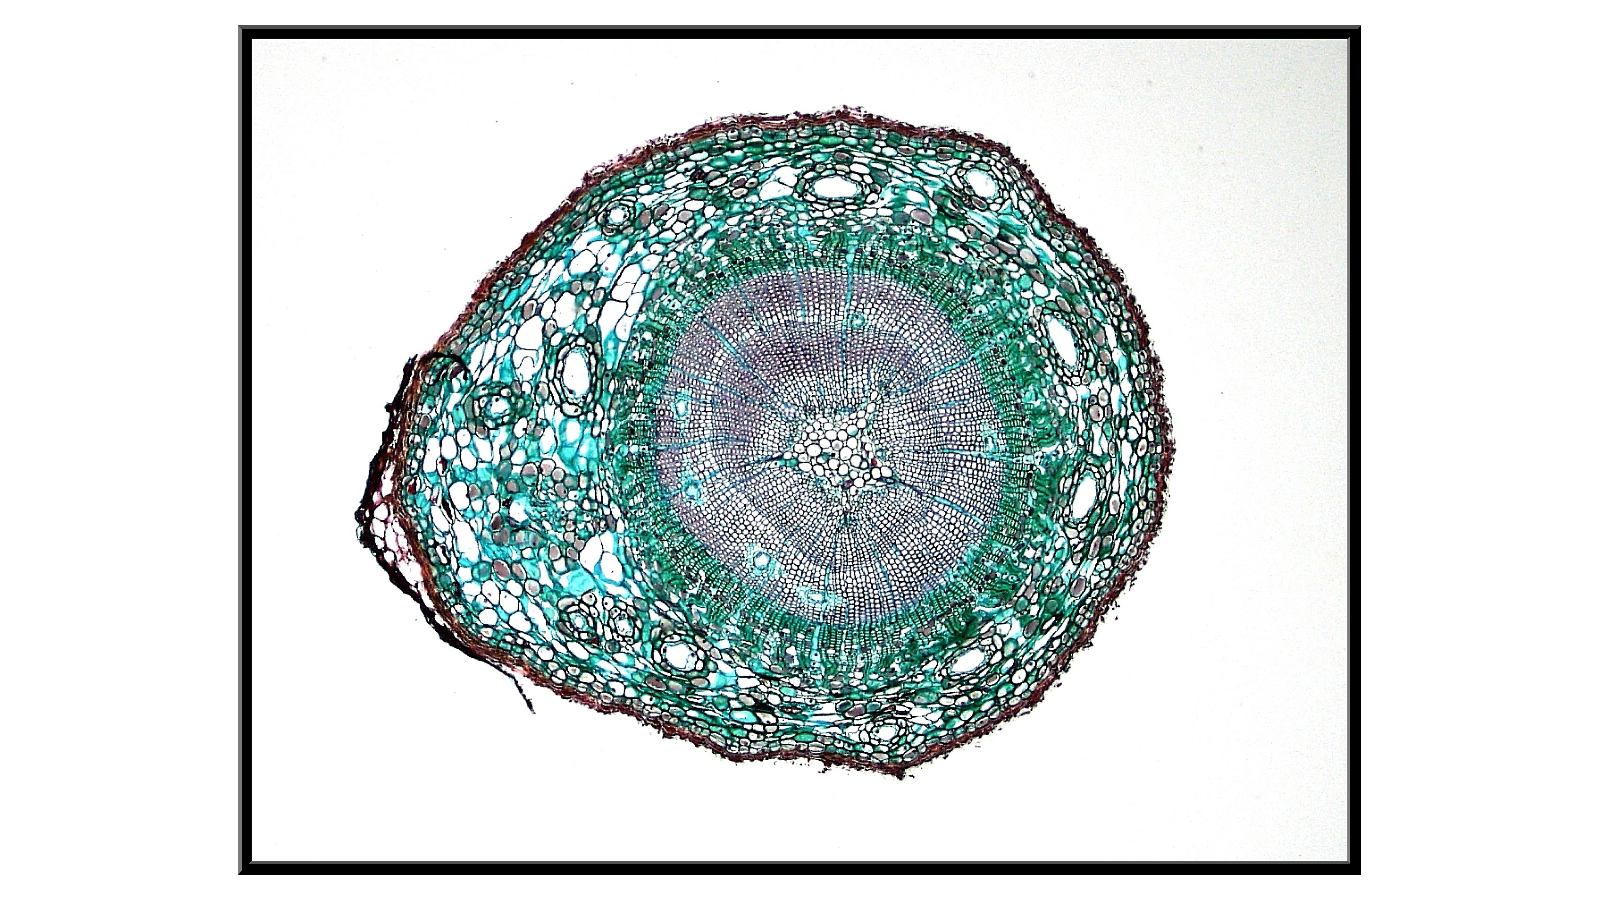 Cross-section of a 2-year-old pine stem x40